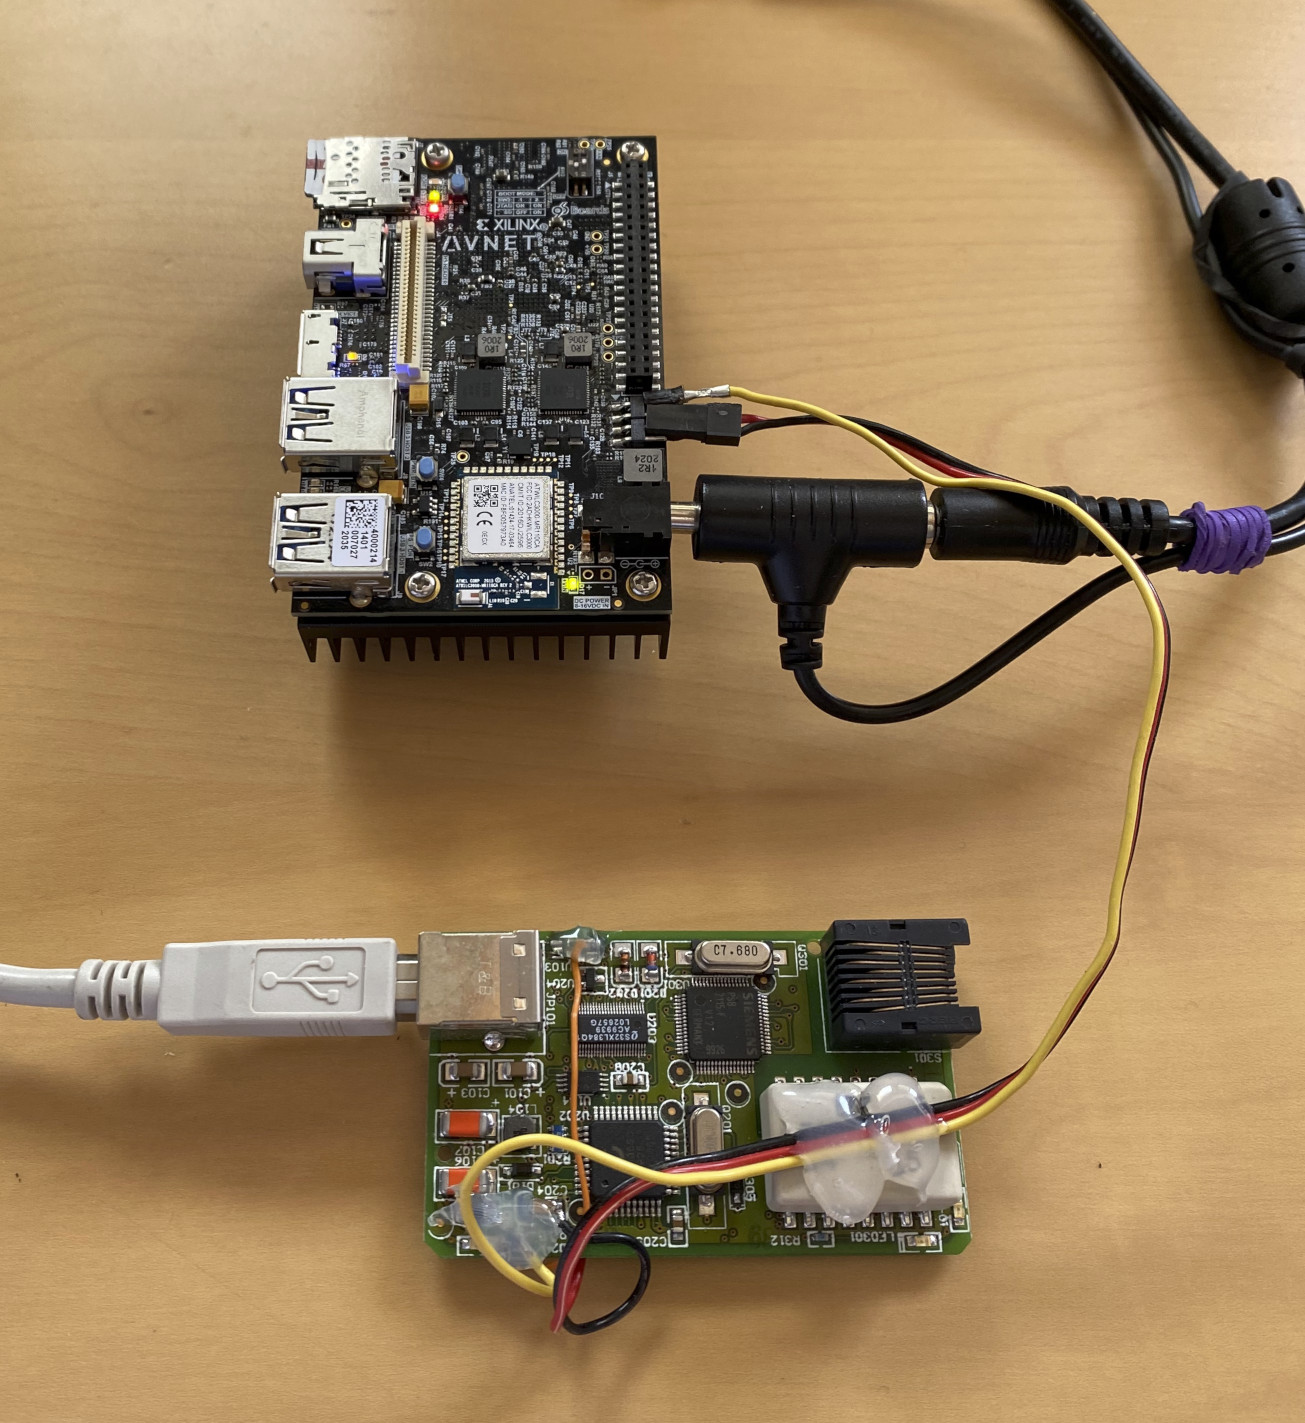 EZ-USB board connected to Ultra96